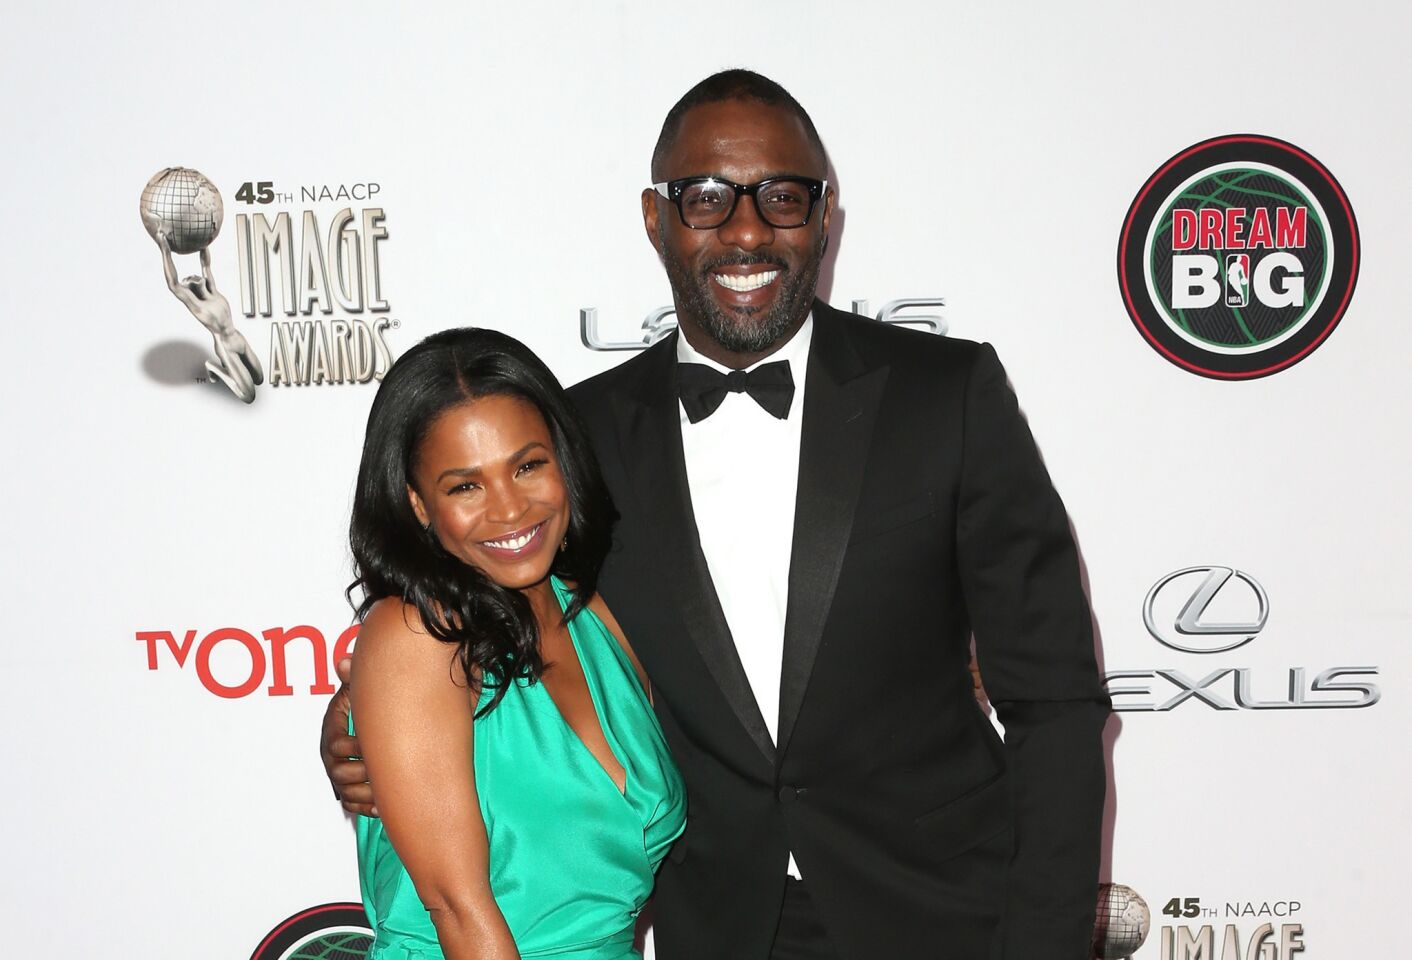 The British actor welcomed a baby boy with makeup artist girlfriend Naiyana Garth. "My Son Winston Elba was born yesterday..Truly Amazing :-)," Elba wrote on Twitter. The bundle of joy will be Elba's second child. His 11-year-old daughter, Isan, lives with his ex-wife Dormowa Sherma in Atlanta.